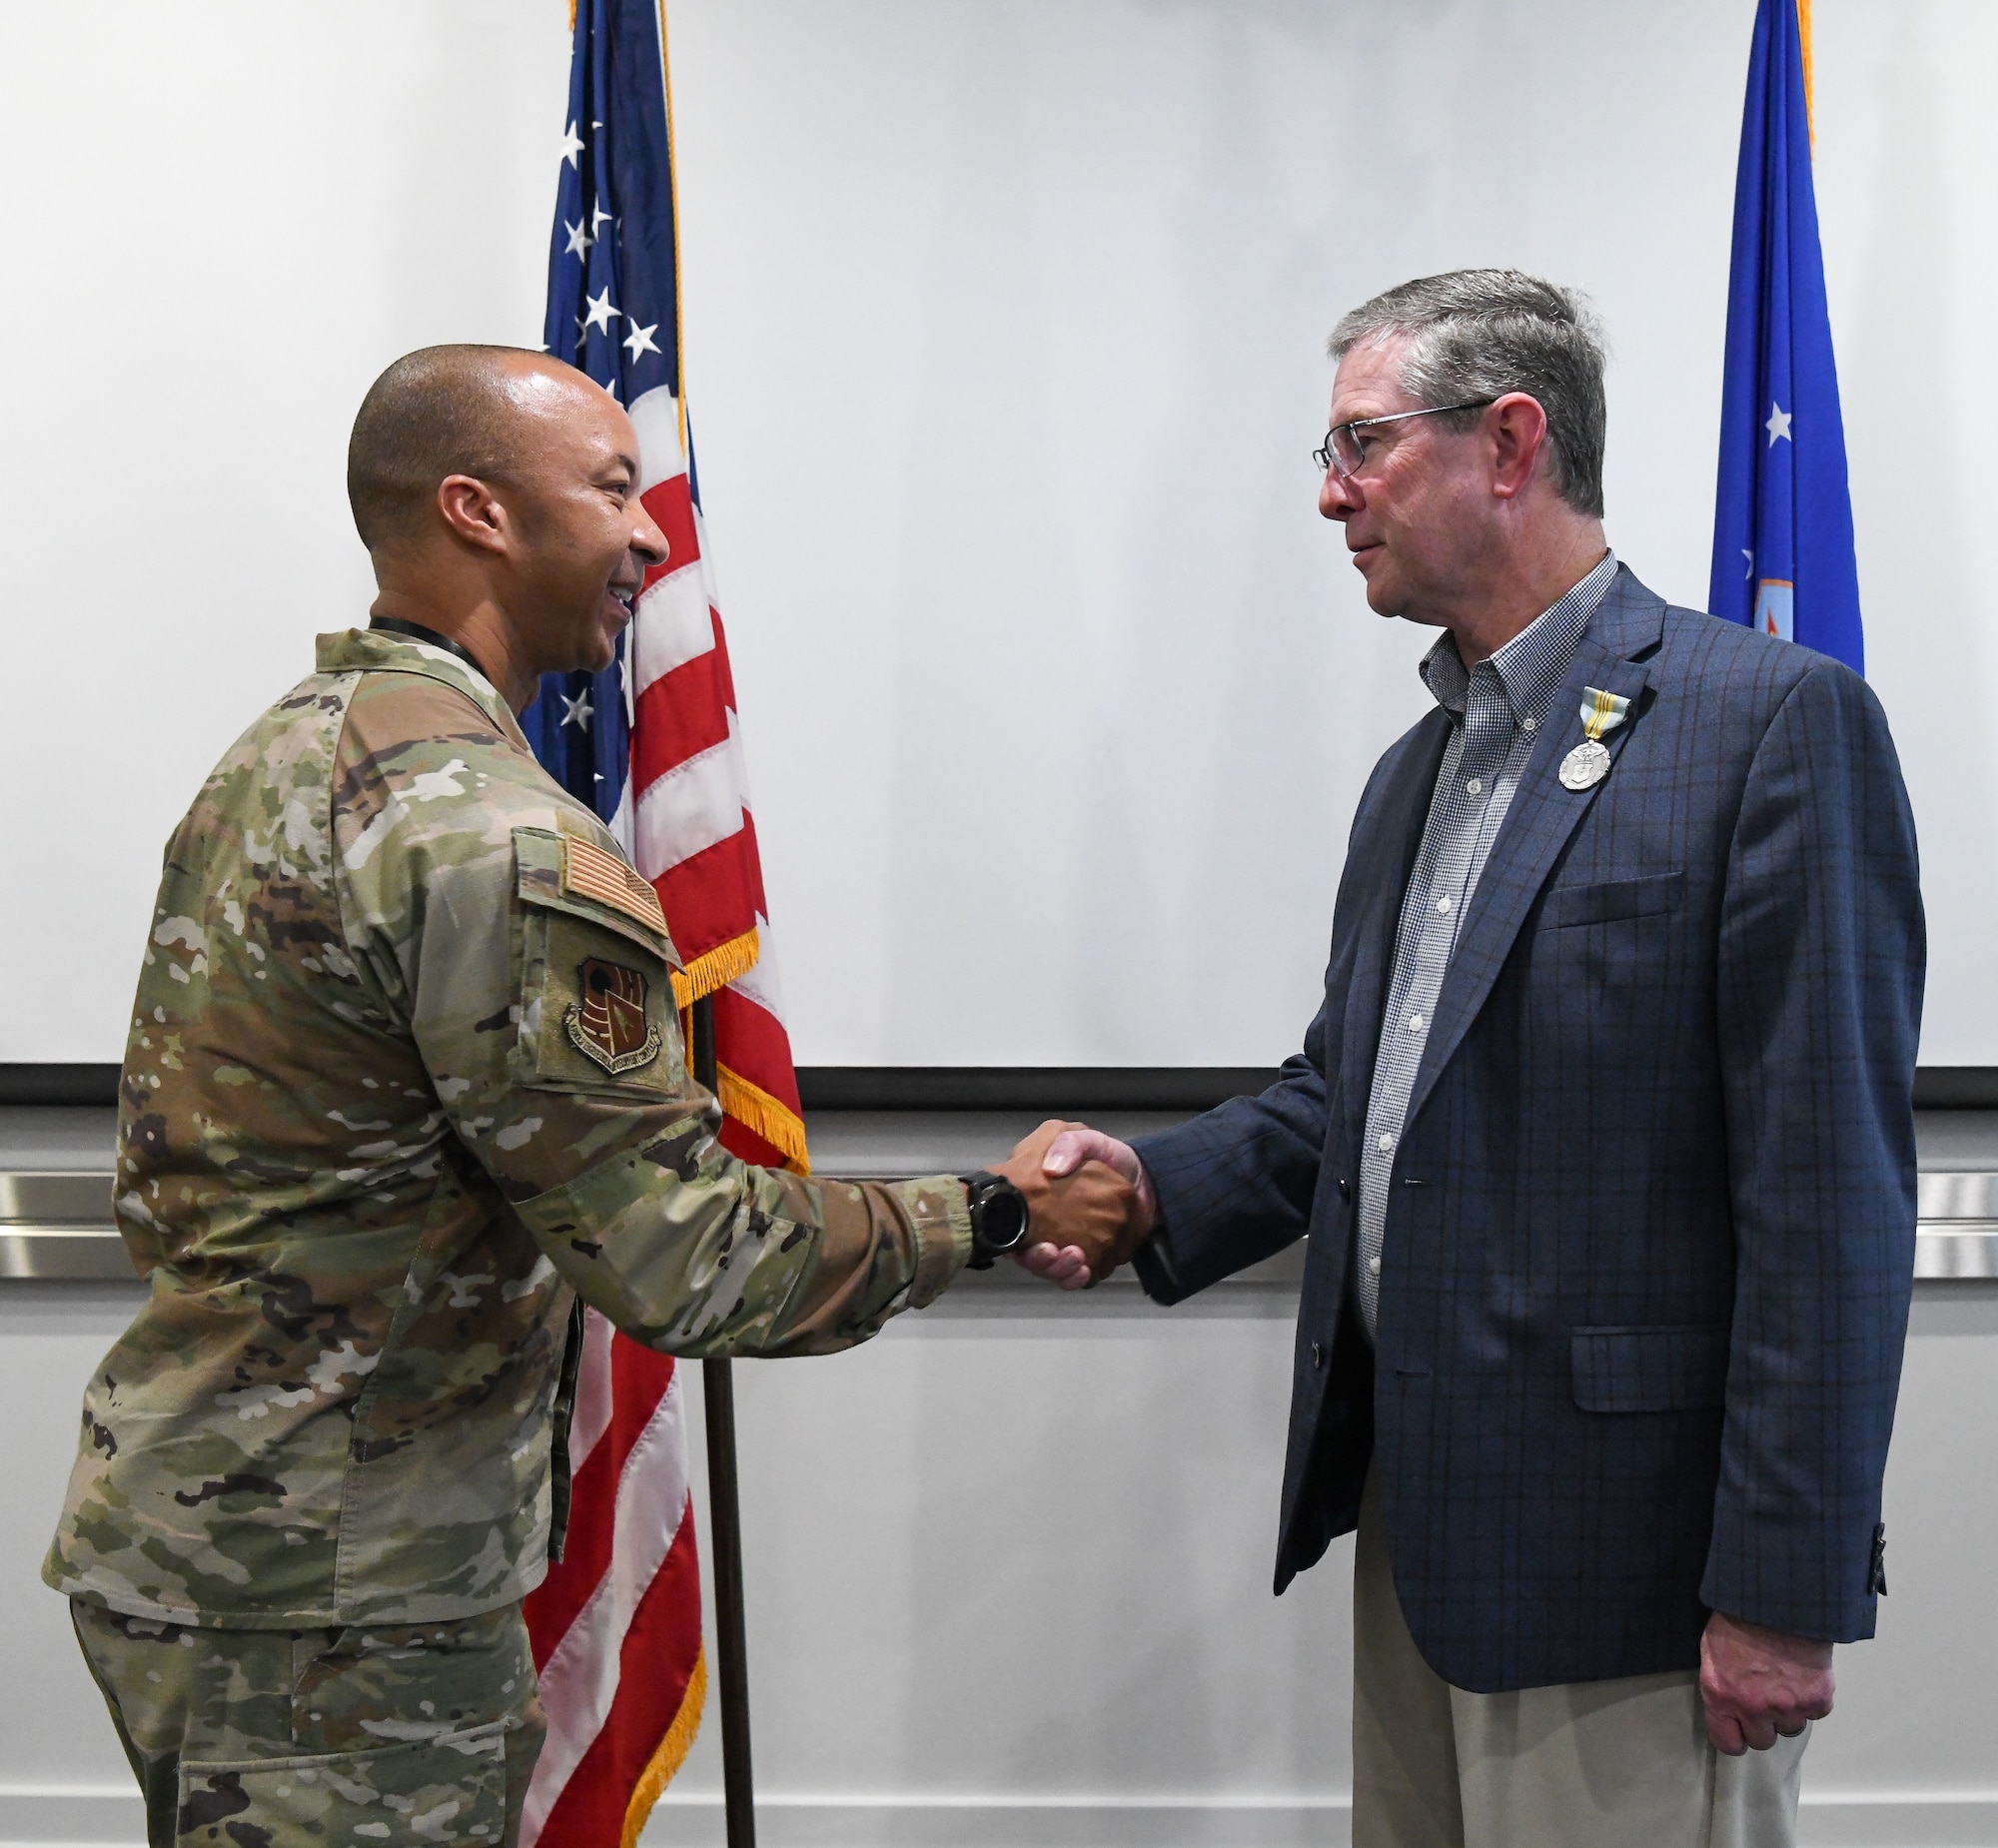 Air Force colonel shaking hands with civilian